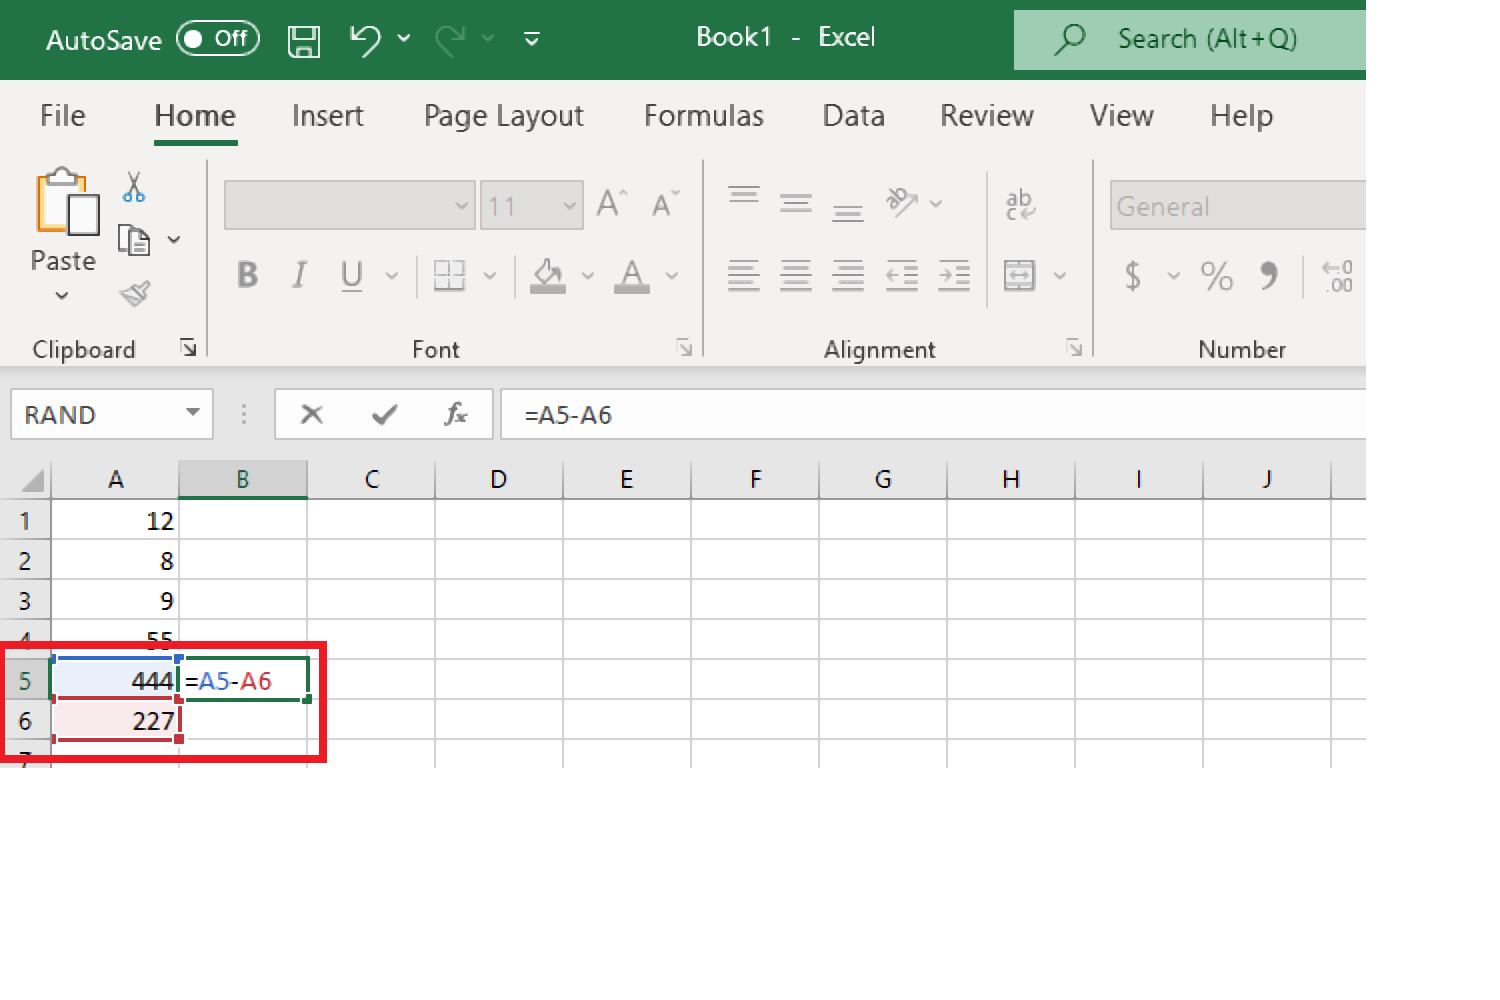 Subtracting two numbers in different cells in Excel using cell references and a formula.